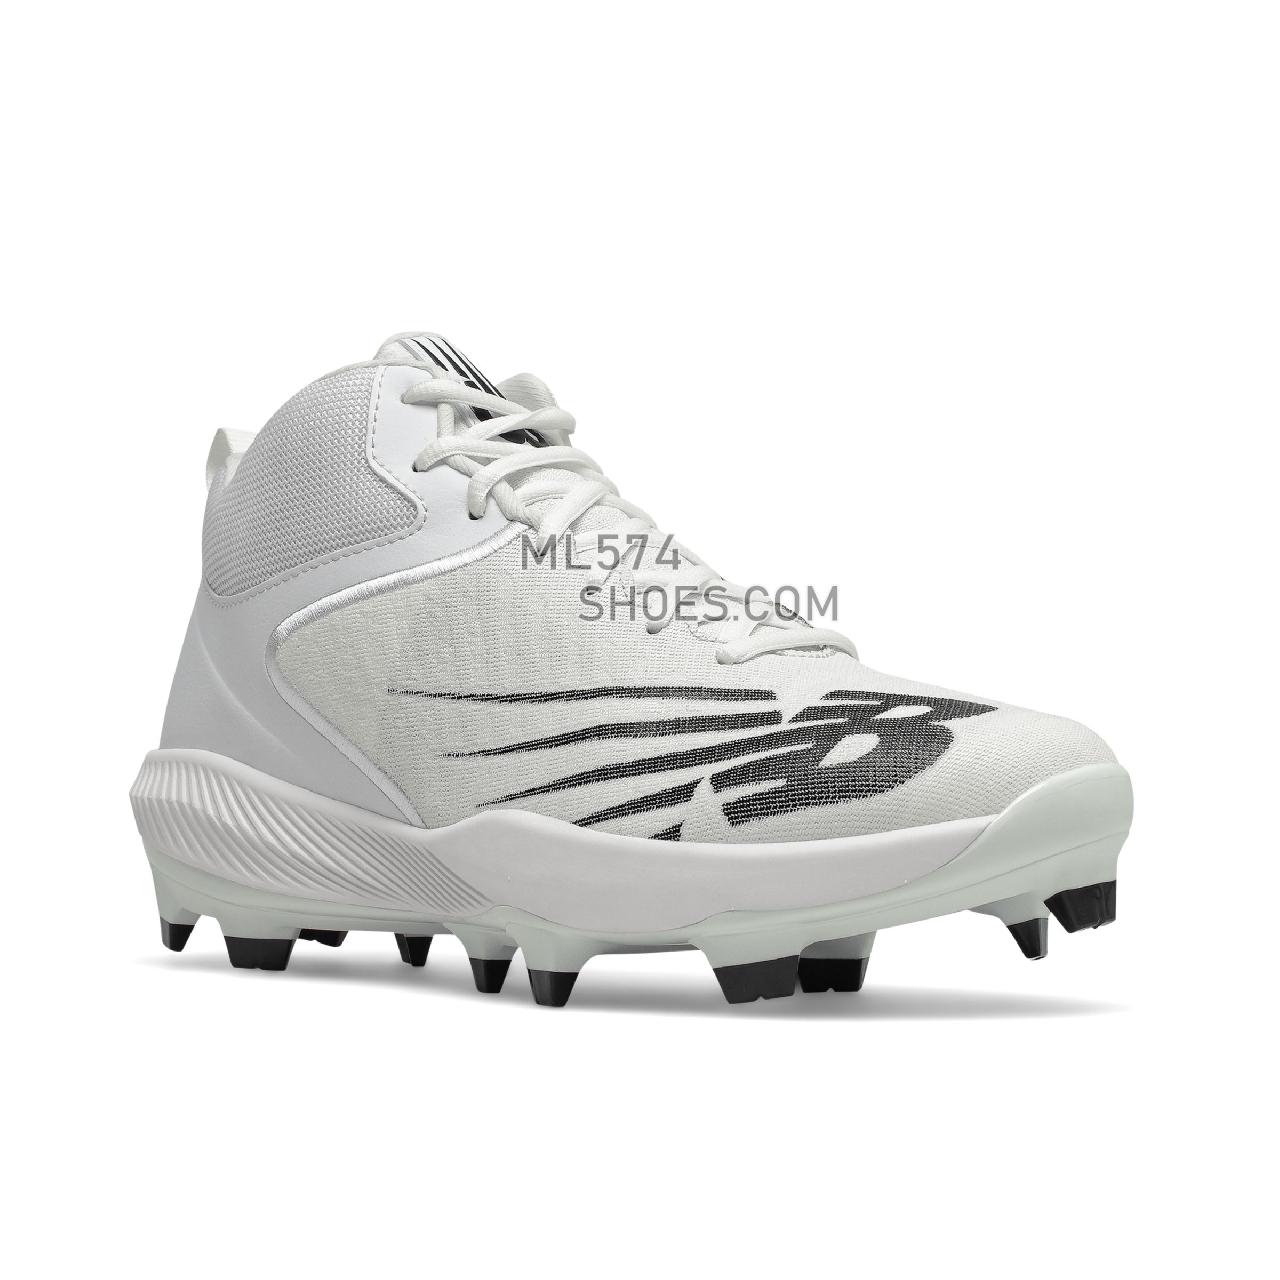 New Balance FuelCell 4040 v6 Mid-Molded - Men's Mid-Cut Baseball Cleats - White with Black - PM4040W6